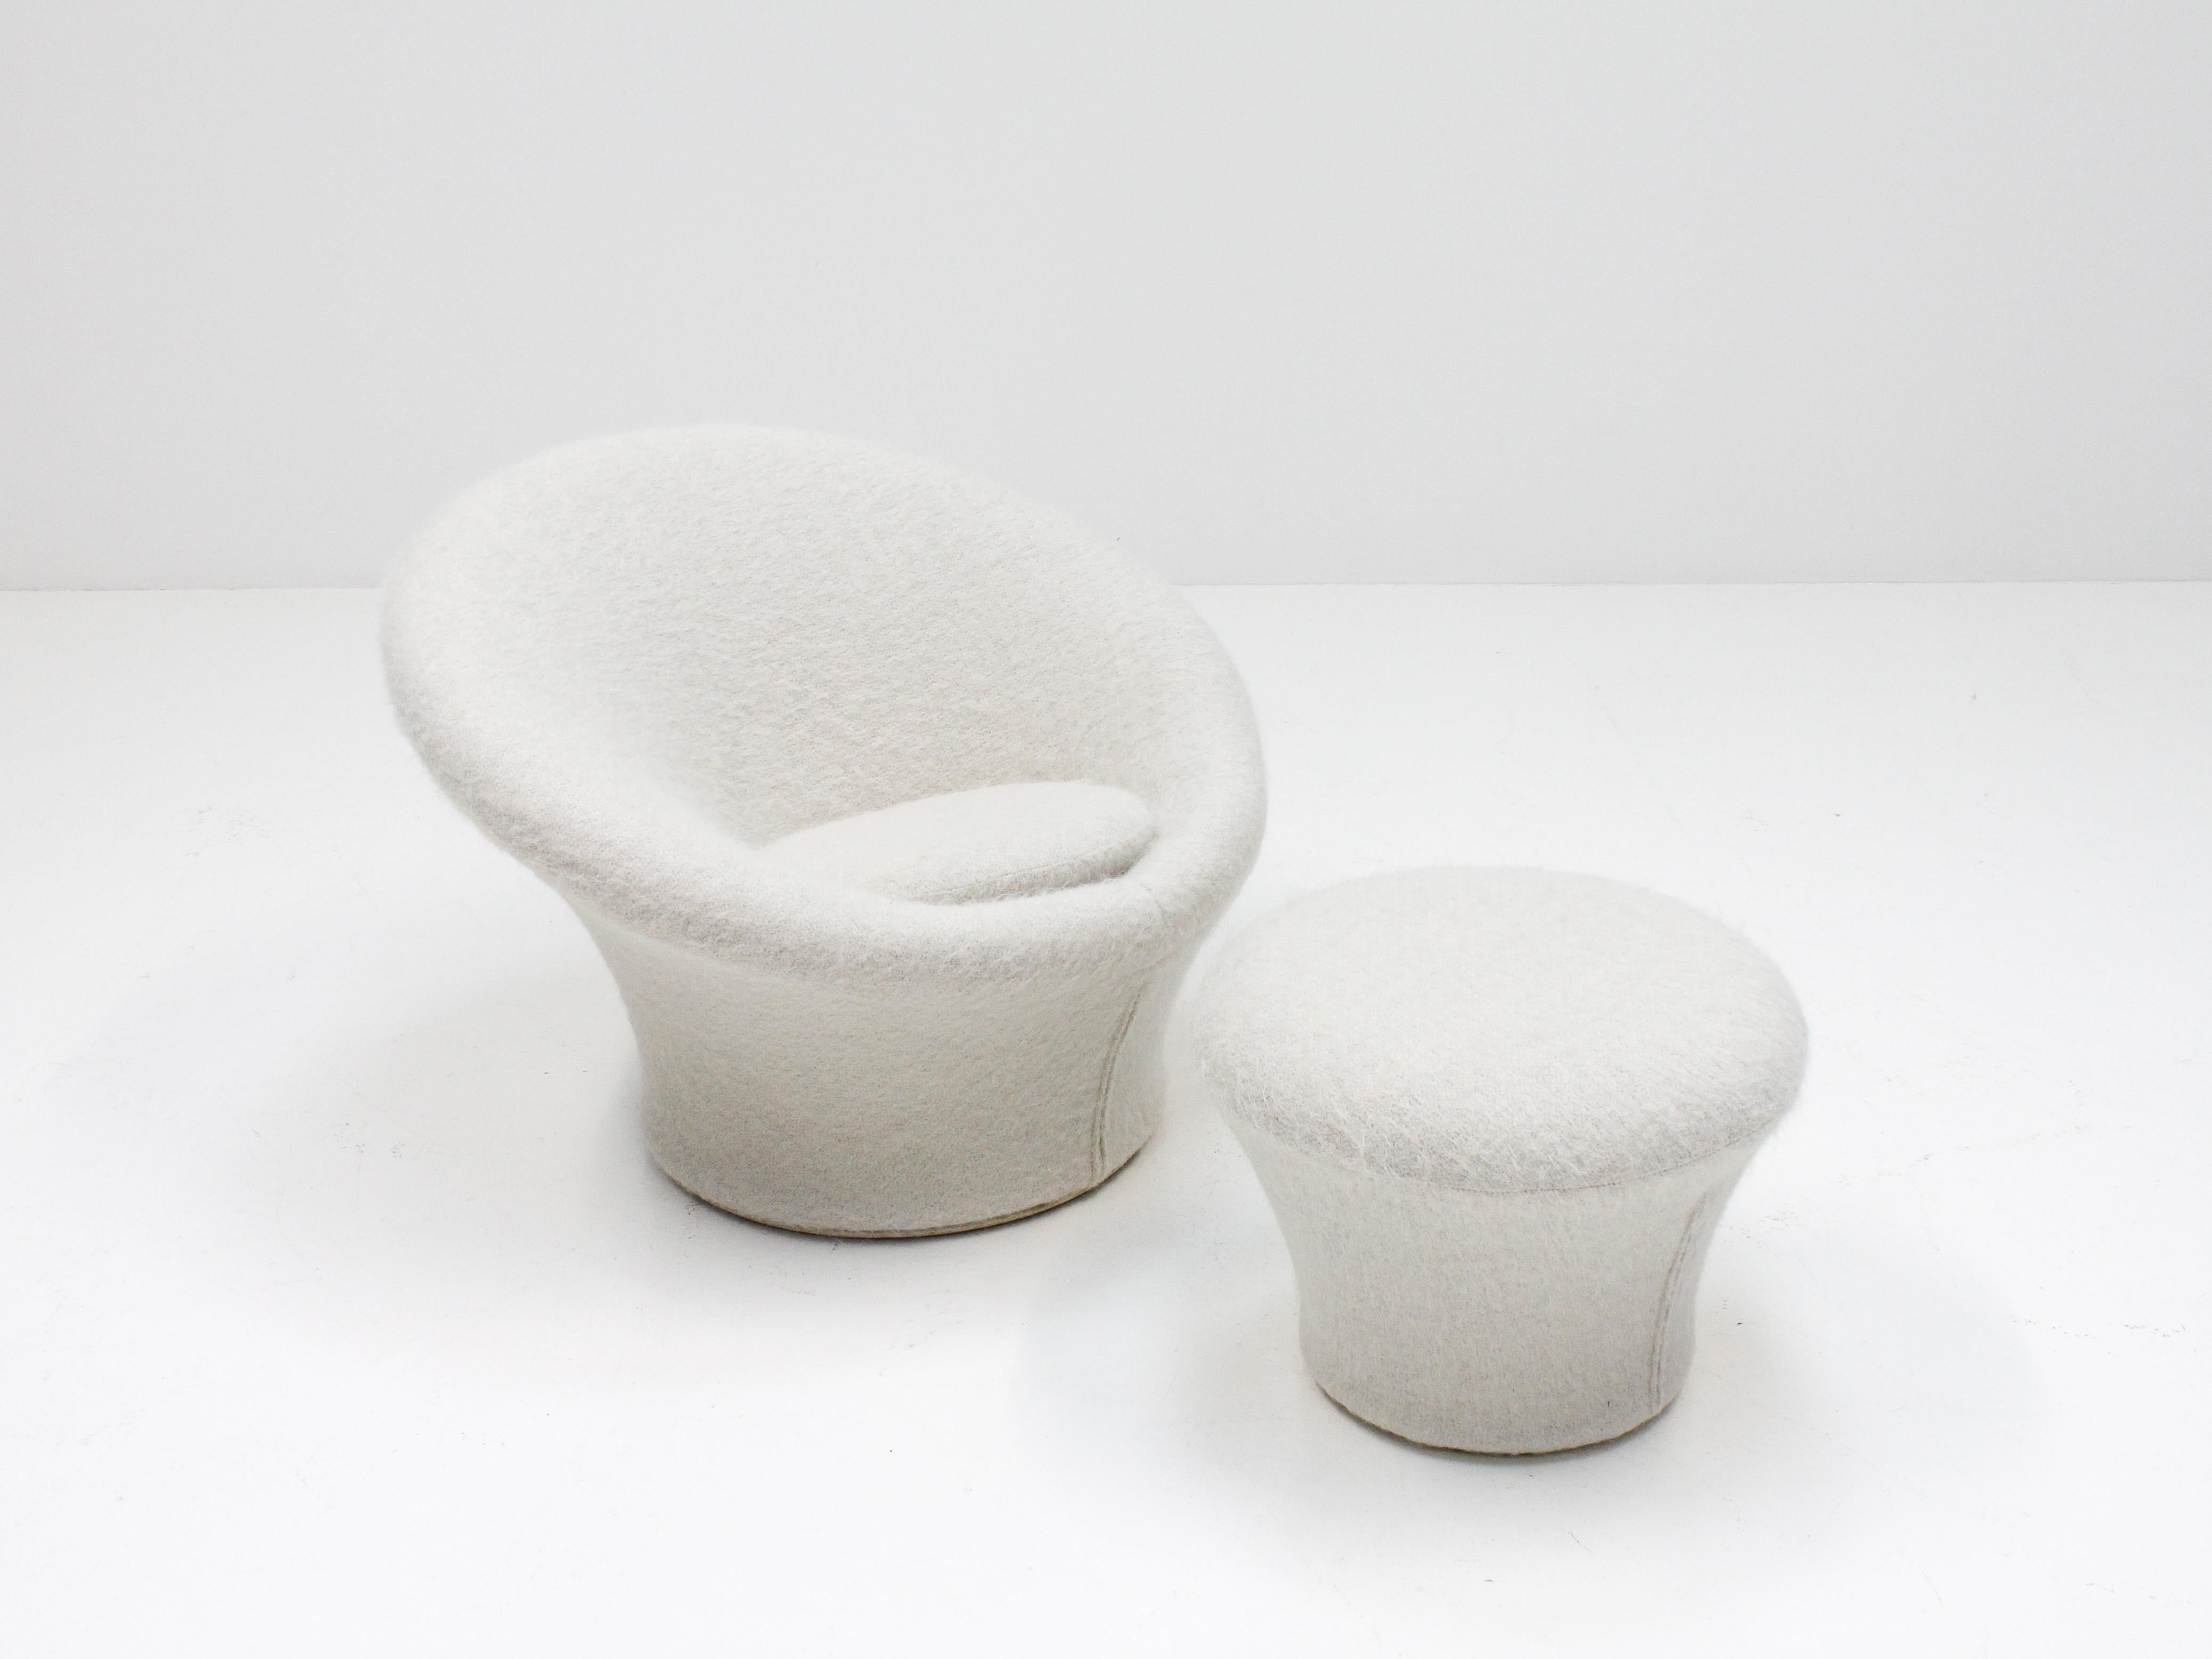 A Pierre Paulin (1927-2009) early edition “Mushroom” armchair and ottoman manufactured by Artifort, Netherlands, 1960s.

A world-famous design which is part of the permanent collection of MoMa (The Museum of Modern Art in New York) and this set is